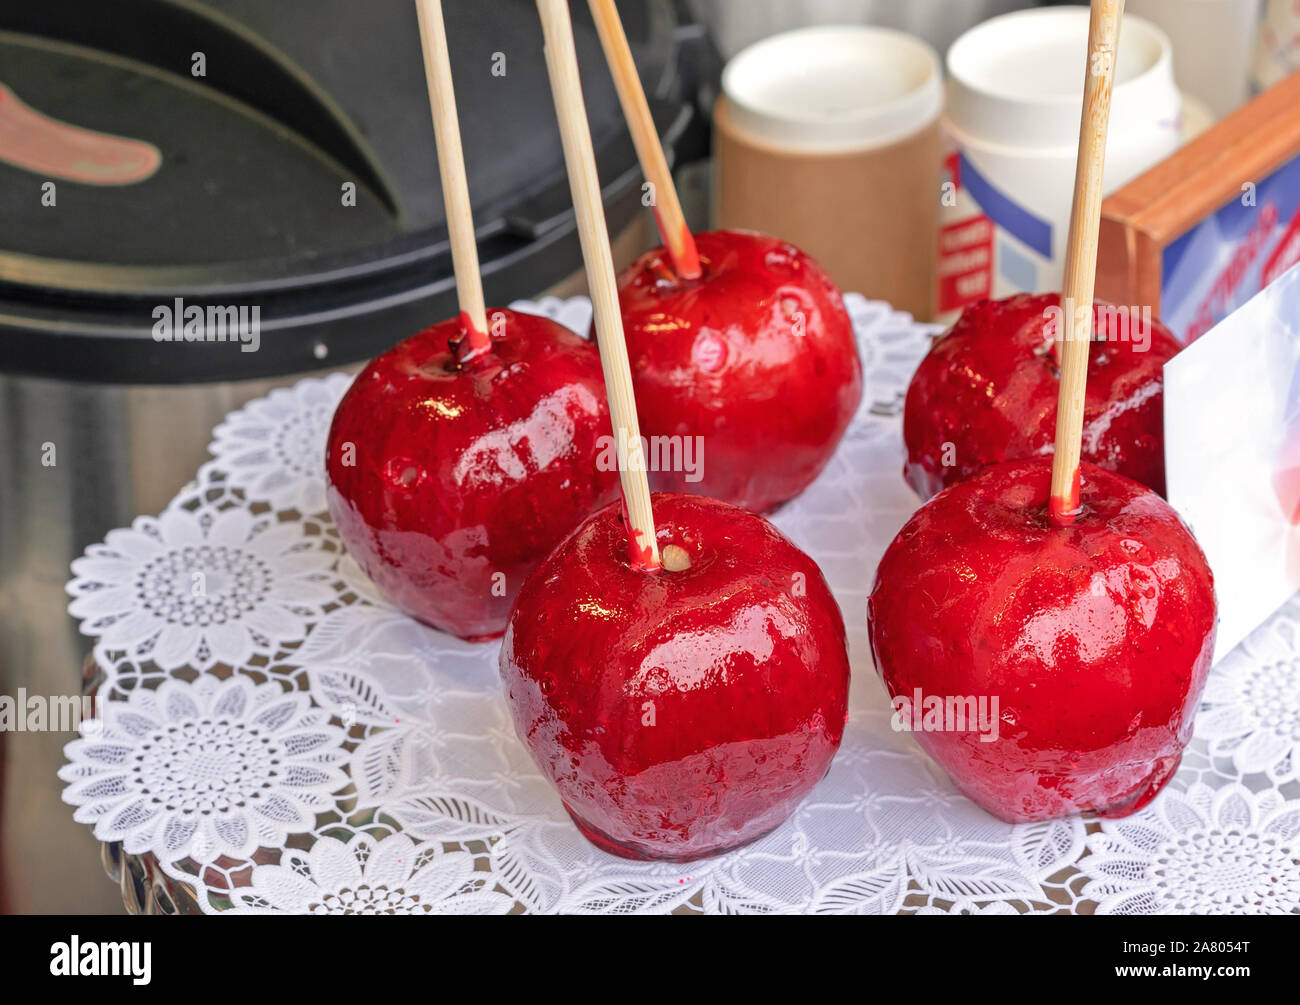 Candy Apple or Taffy Apple - red caramelized apples on a stick. Stock Photo